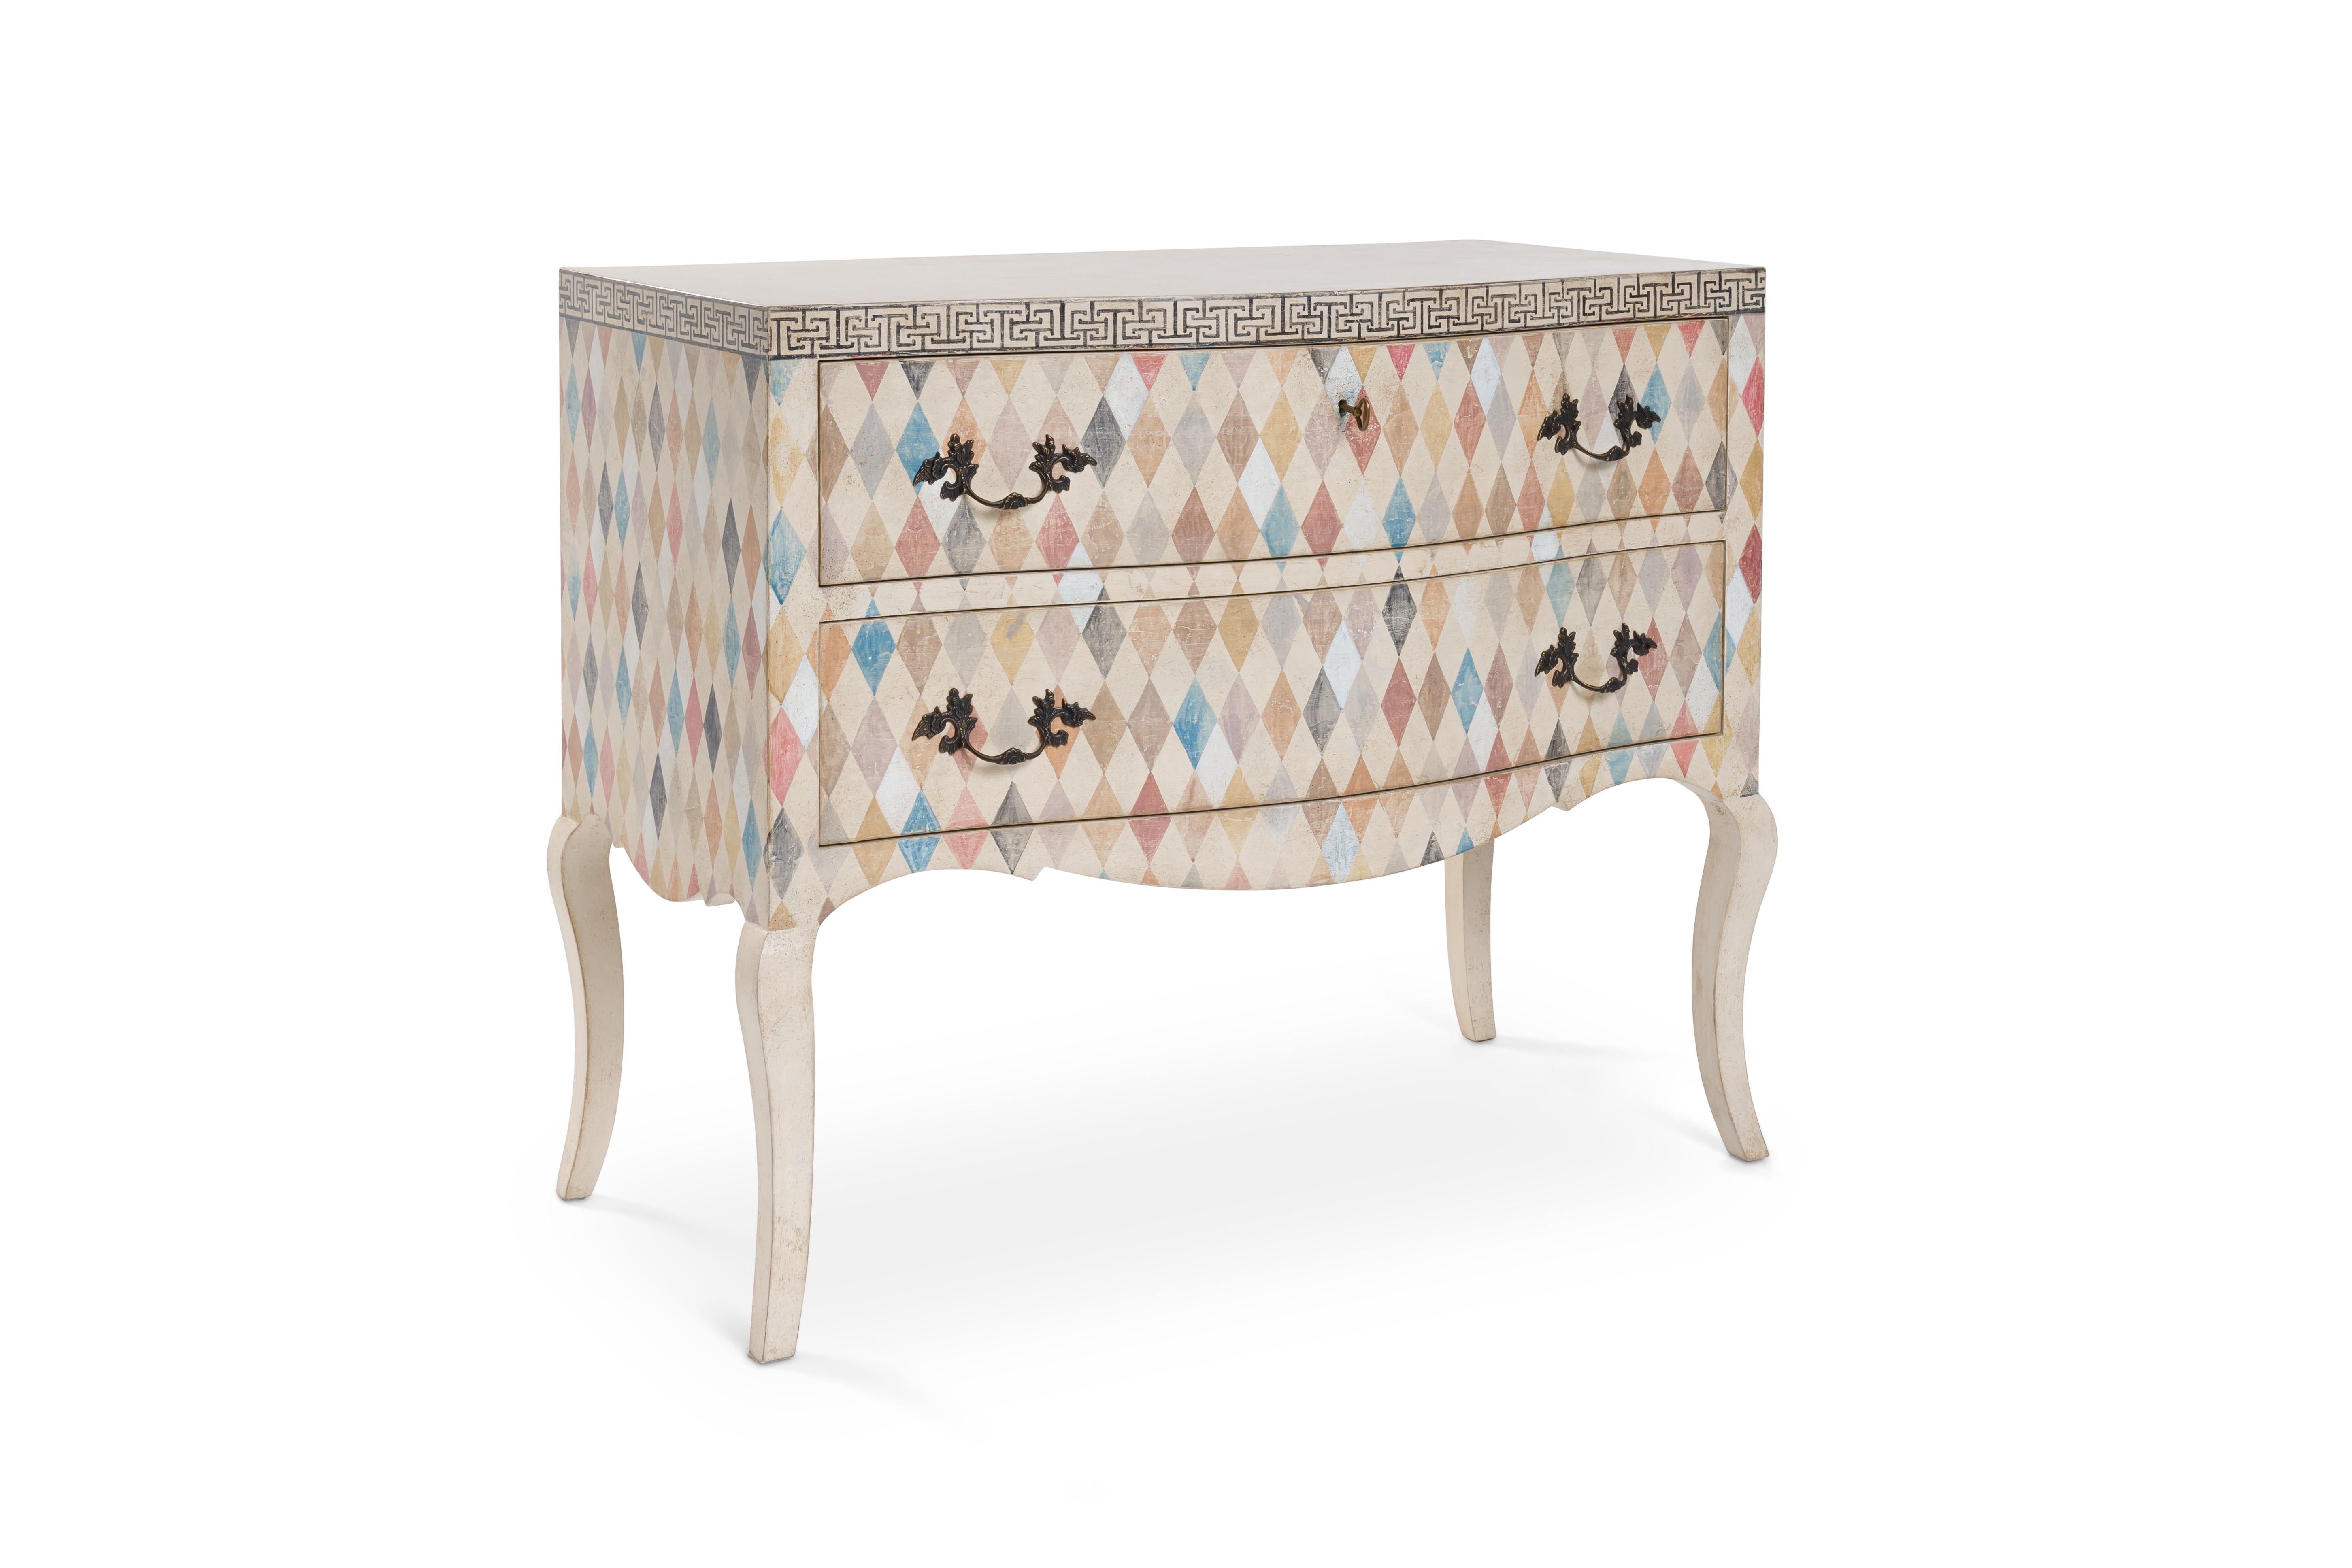 From our hand-painted Furniture Collection, we are pleased to introduce you to our Serenissima chest with Harlequin inspired decors.
Harlequin, the most discriminating character from the Italian commedia dell'arte, is the main inspiration behind